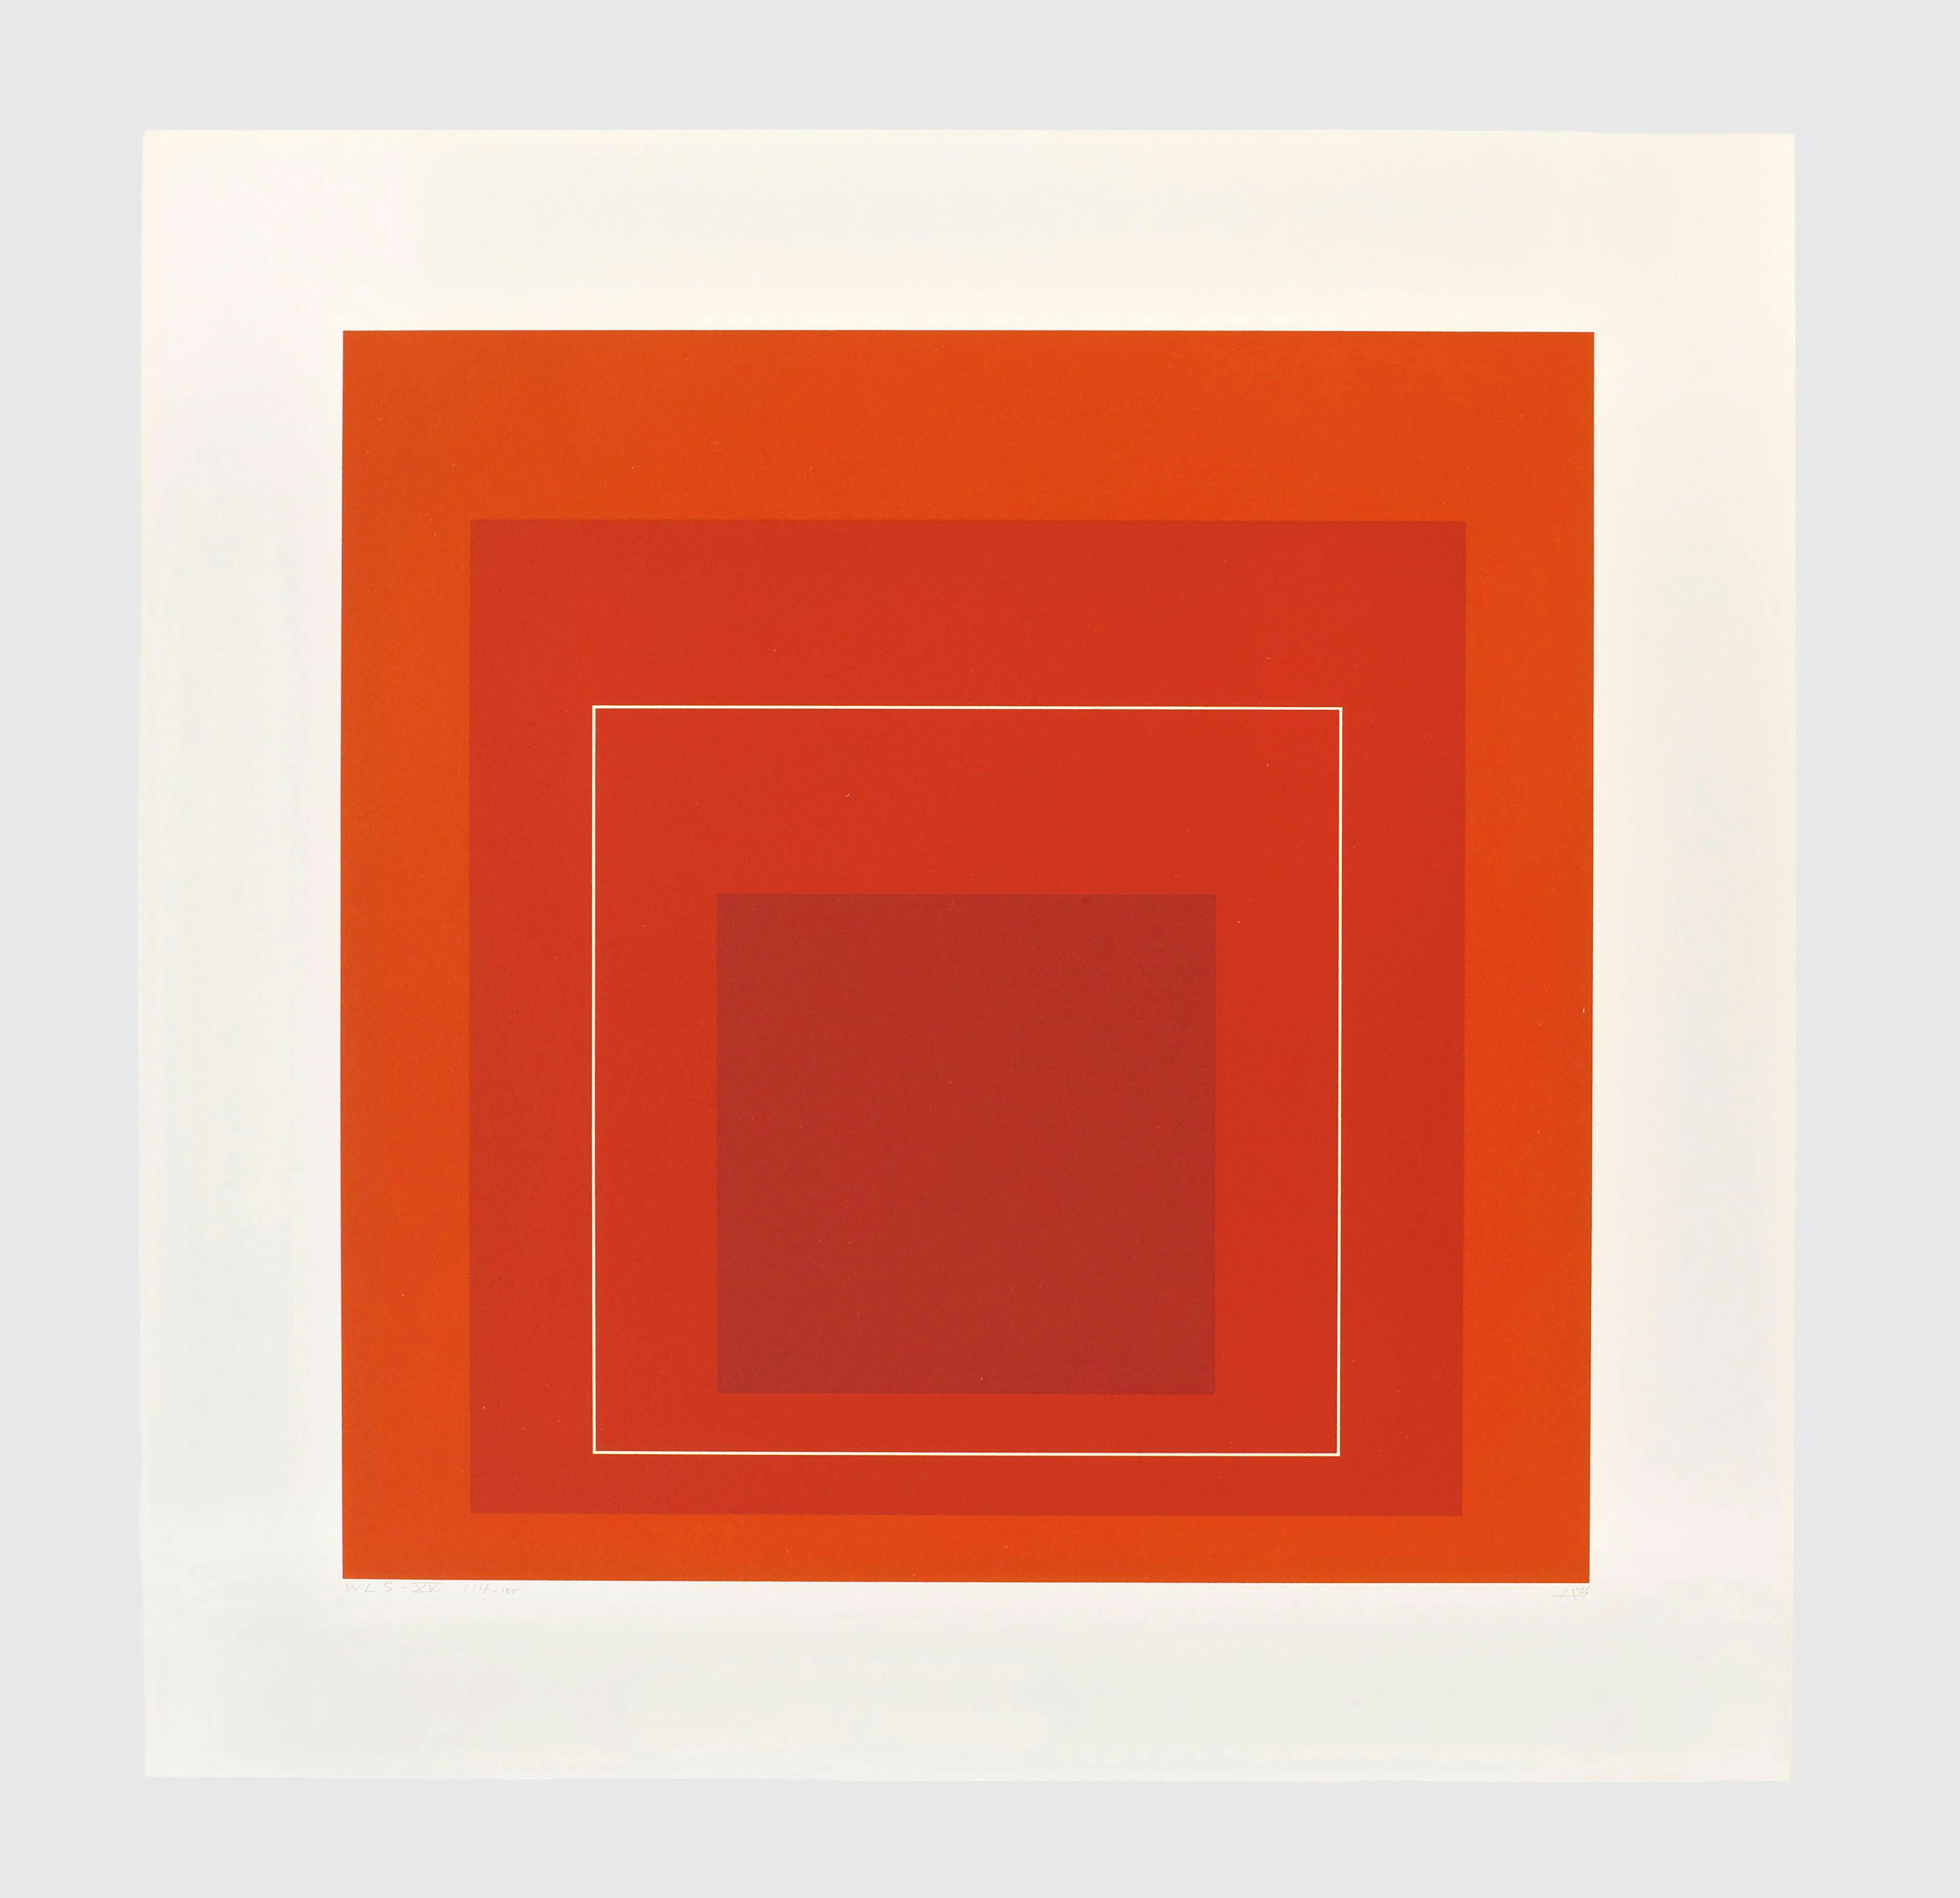 A print by Josef Albers, titled WLS XV, dated 1966.